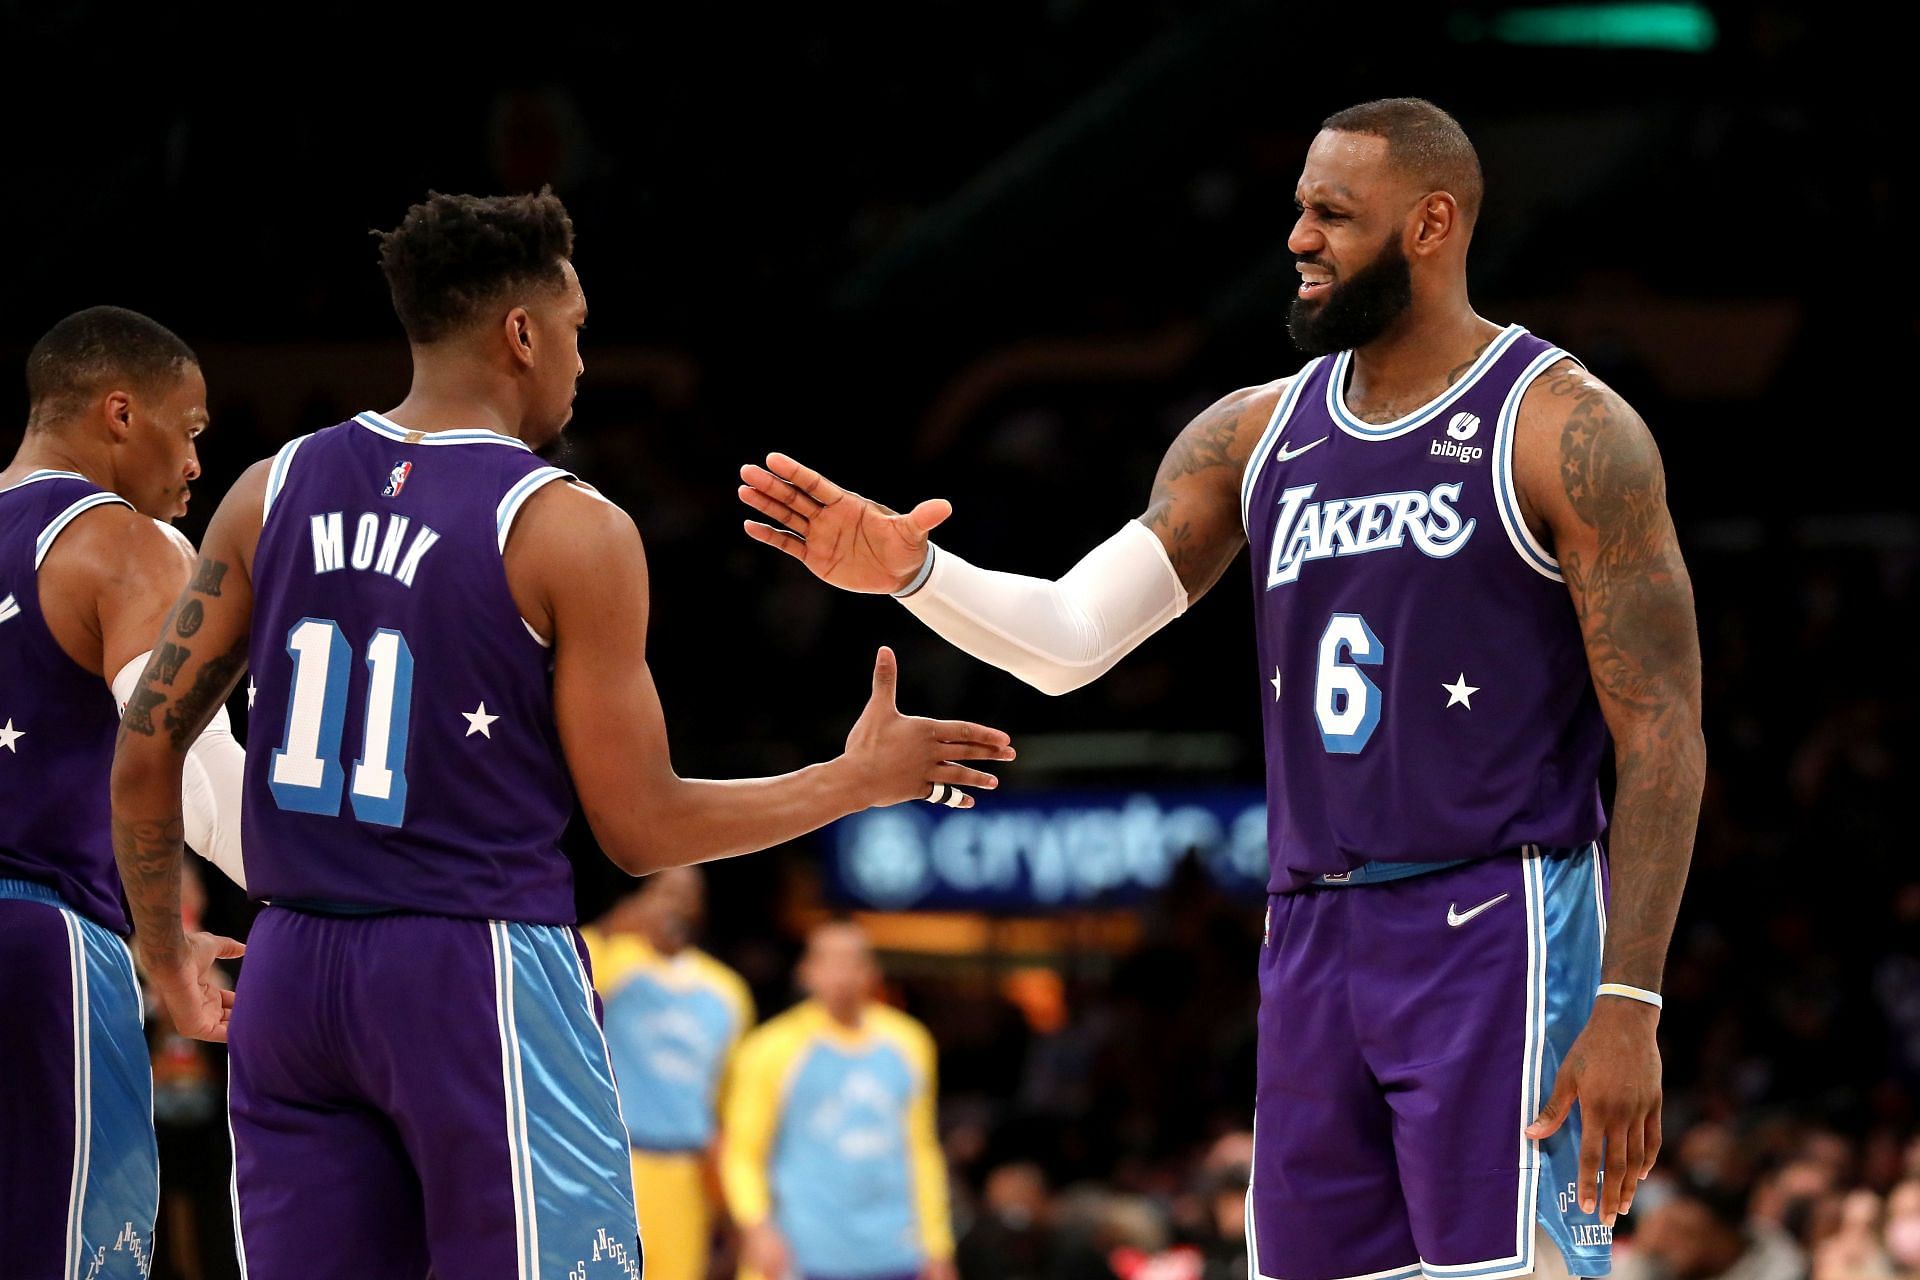 Malik Monk and LeBron James high-five each other during the Portland Trail Blazers v LA Lakers game